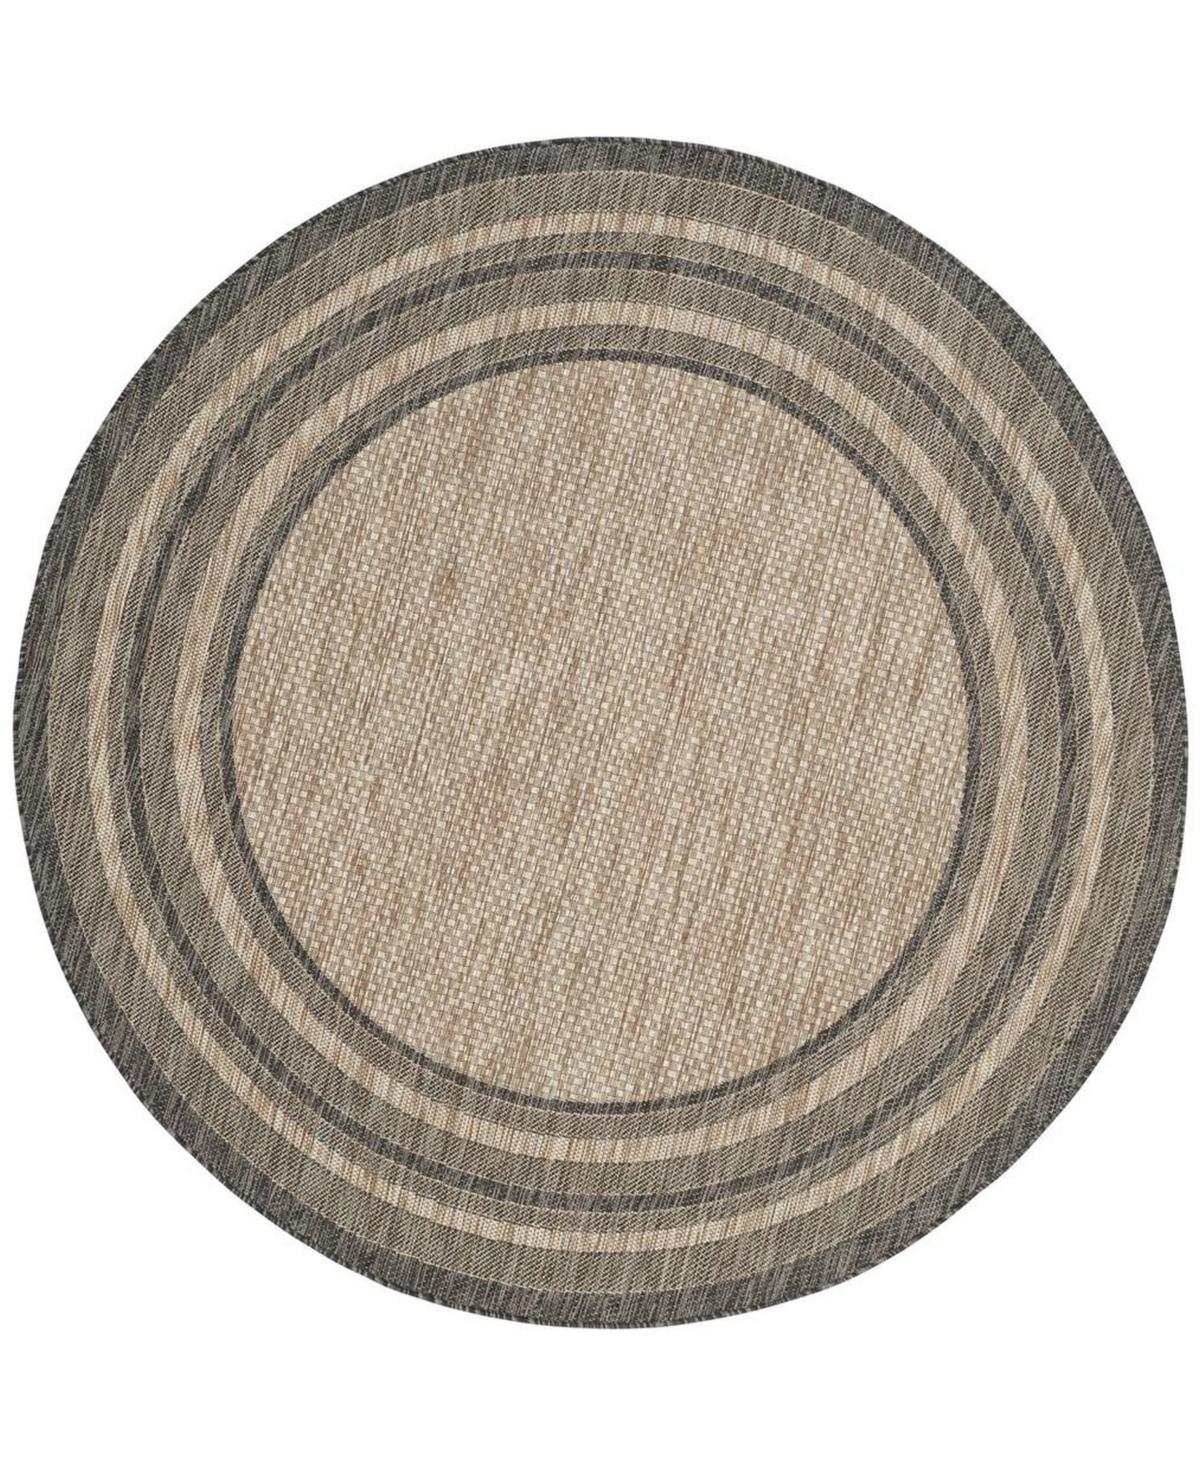 Safavieh Courtyard Cy8475 Natural And Black 6'7" X 6'7" Round Outdoor Area Rug